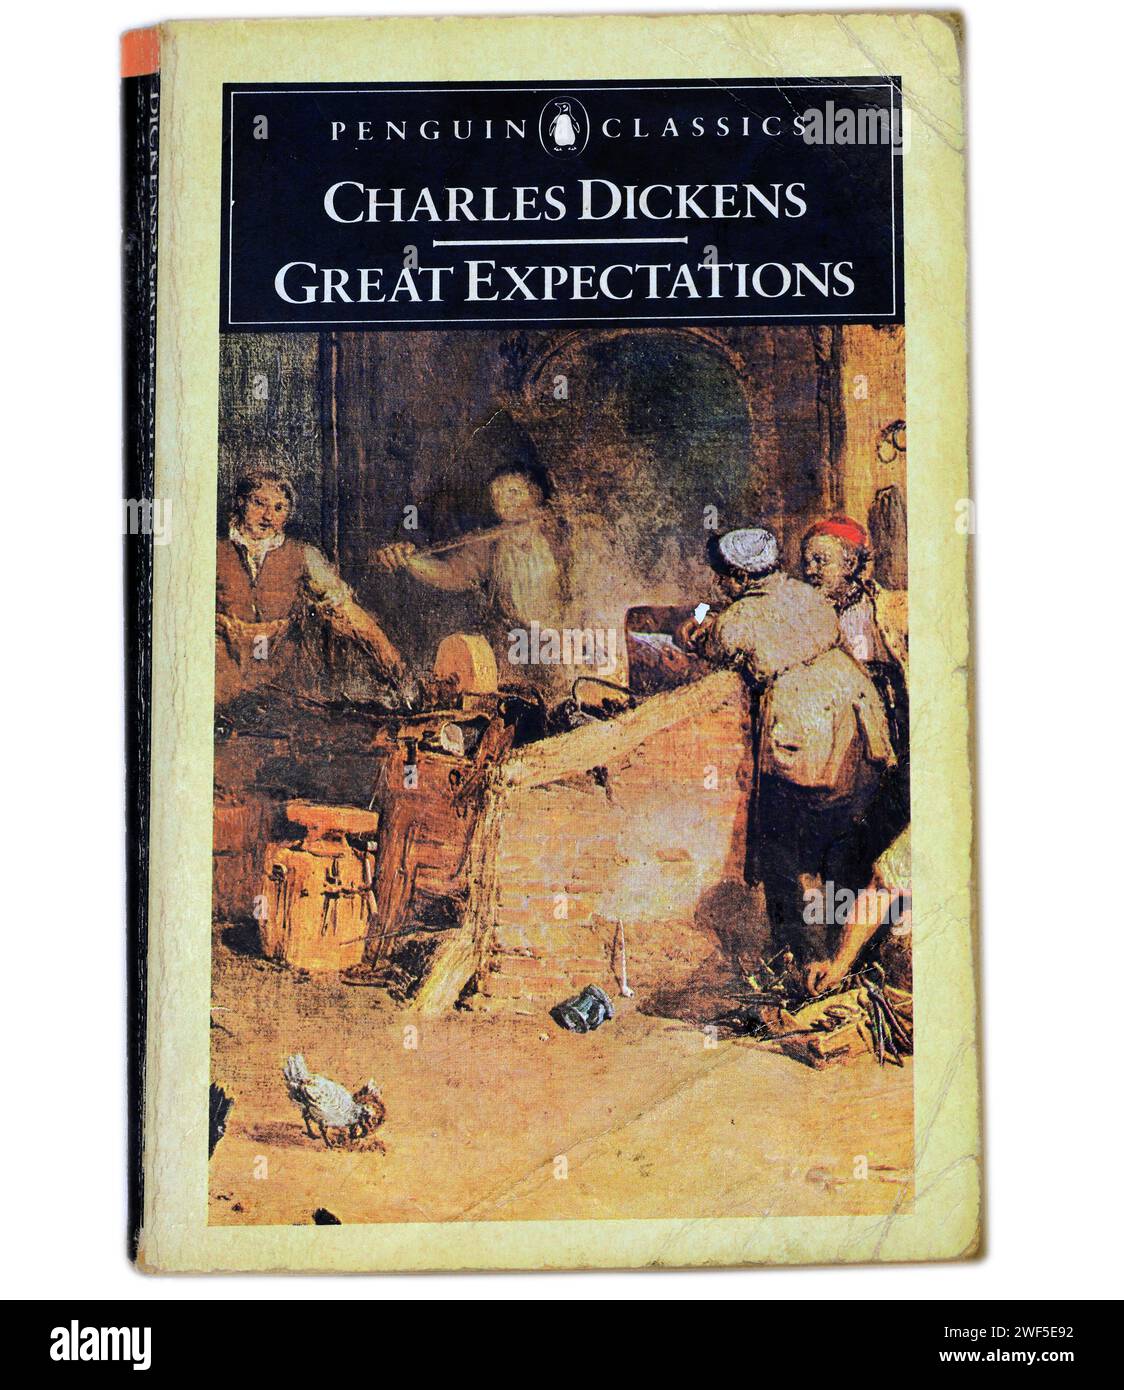 Great Expectations by Charles Dickens. Book cover on light / white background Stock Photo